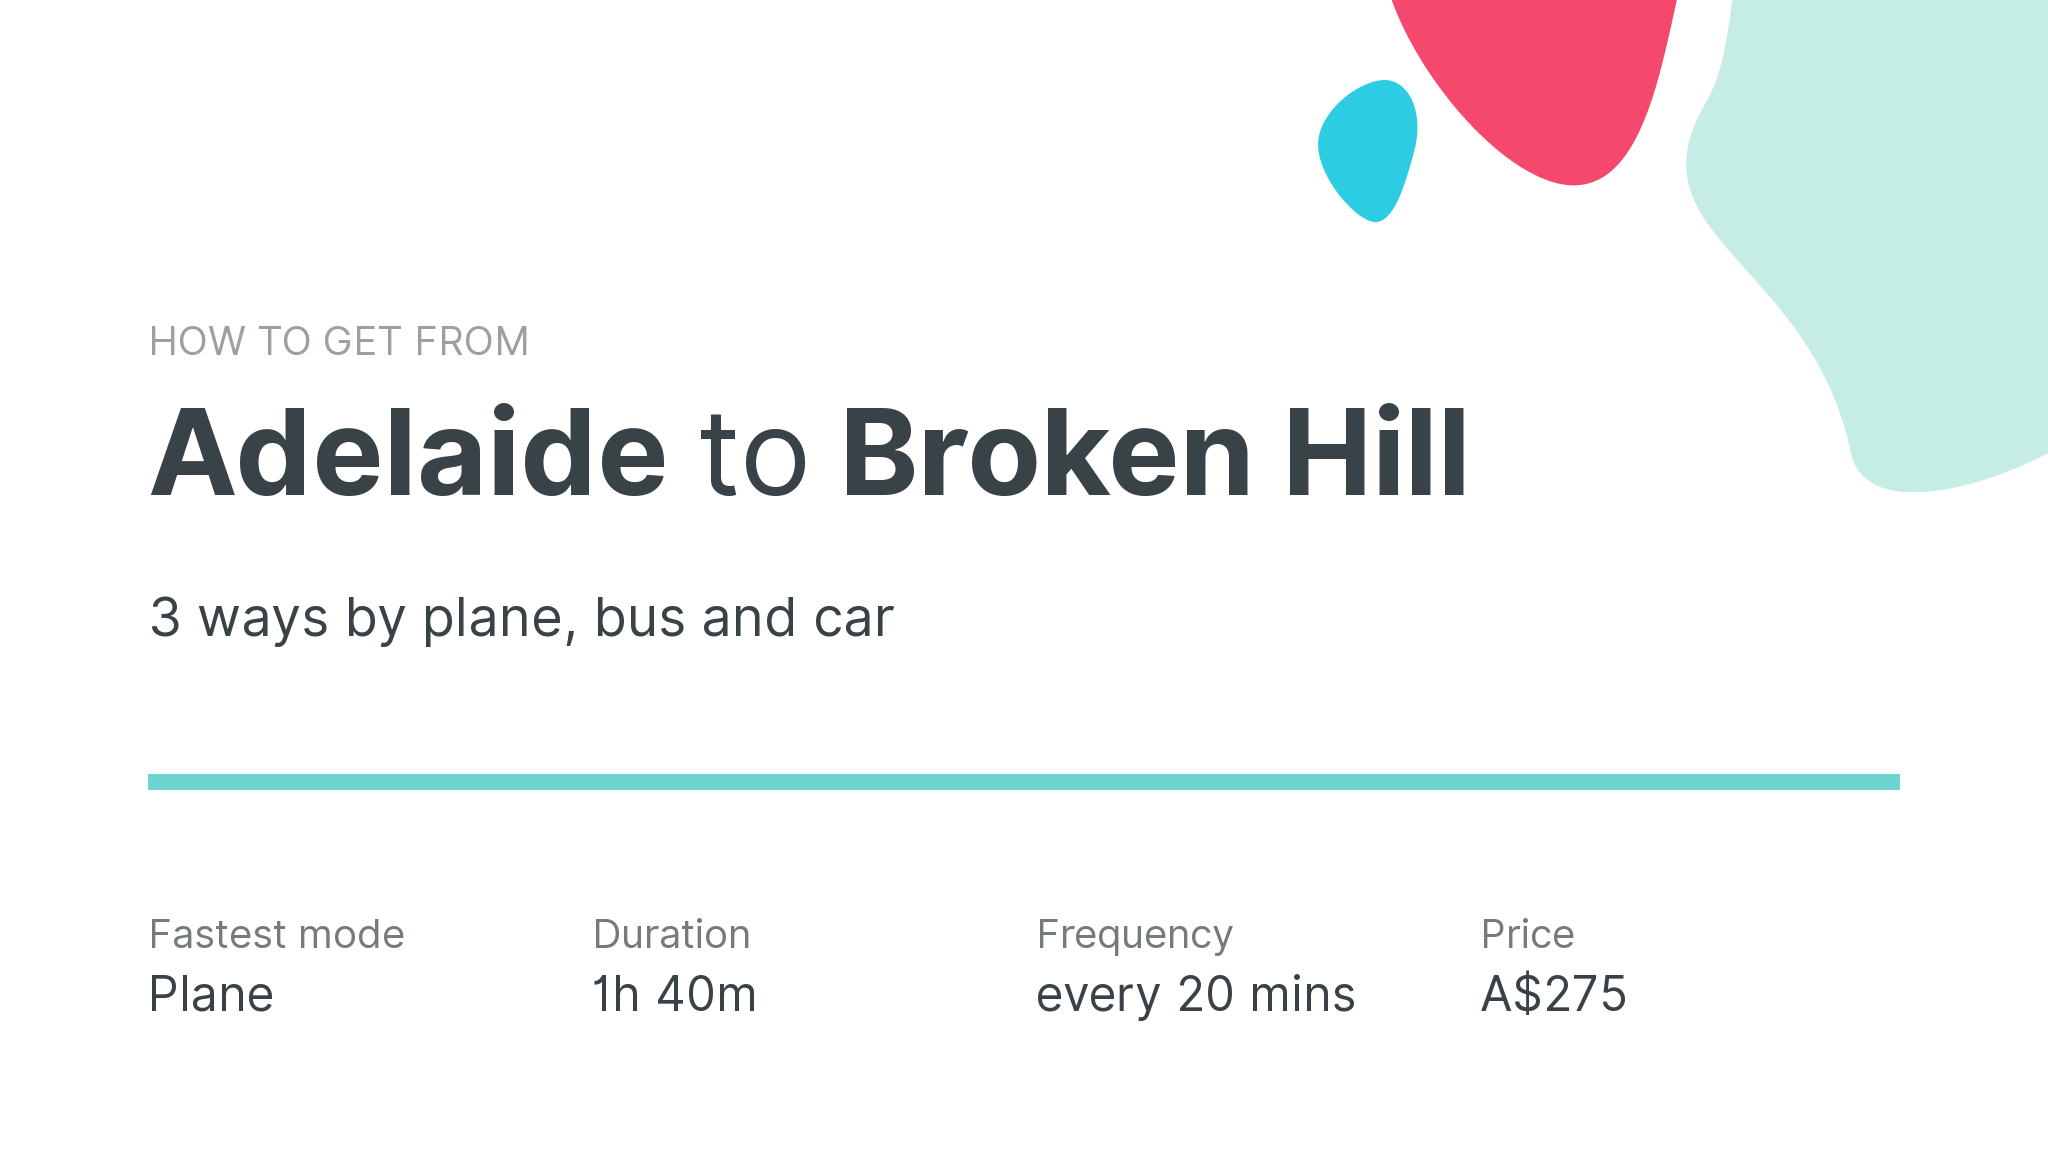 How do I get from Adelaide to Broken Hill